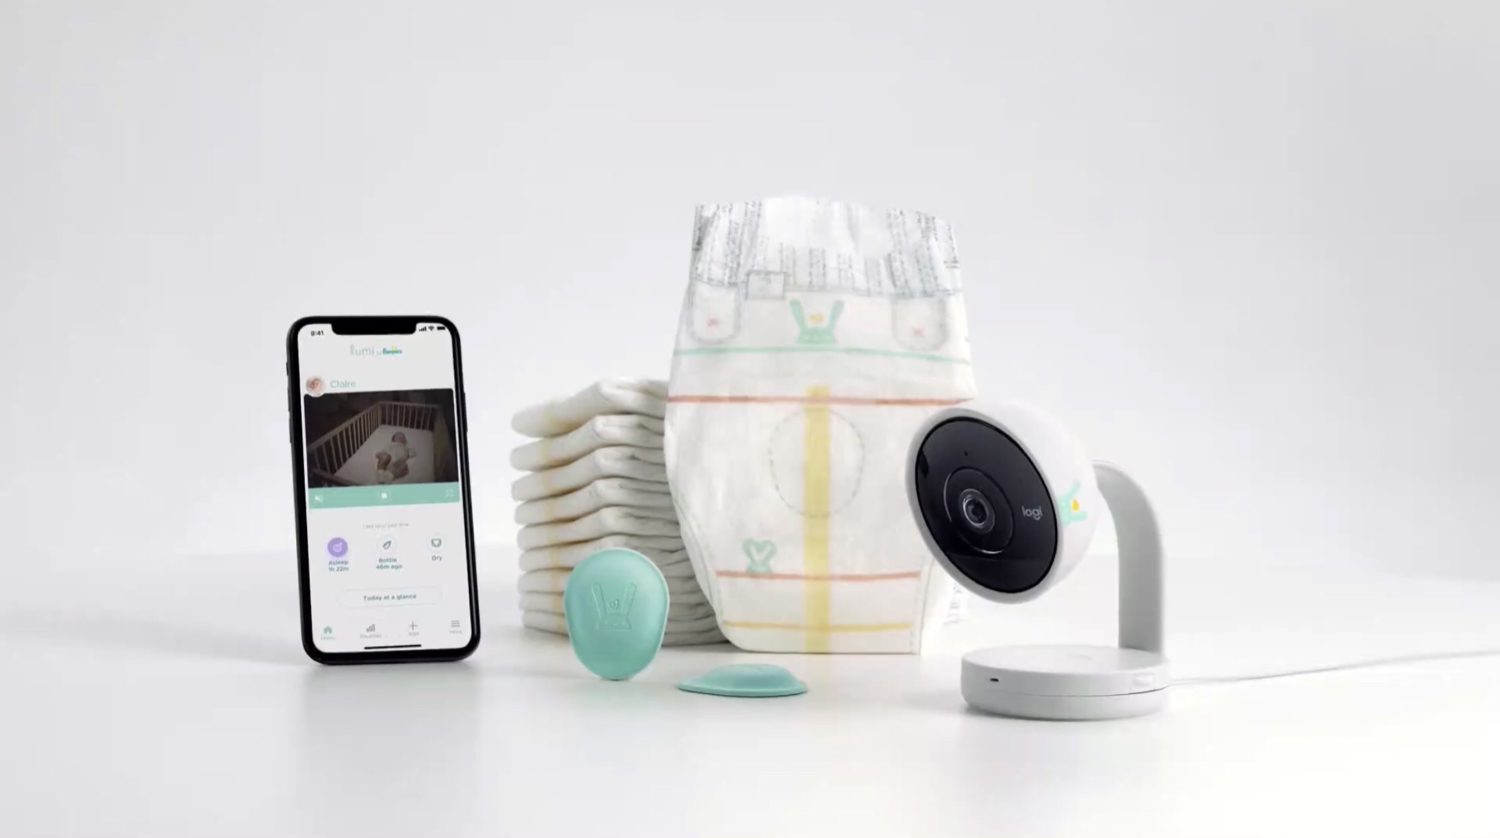 The Lumi by Pampers Connected Care System.